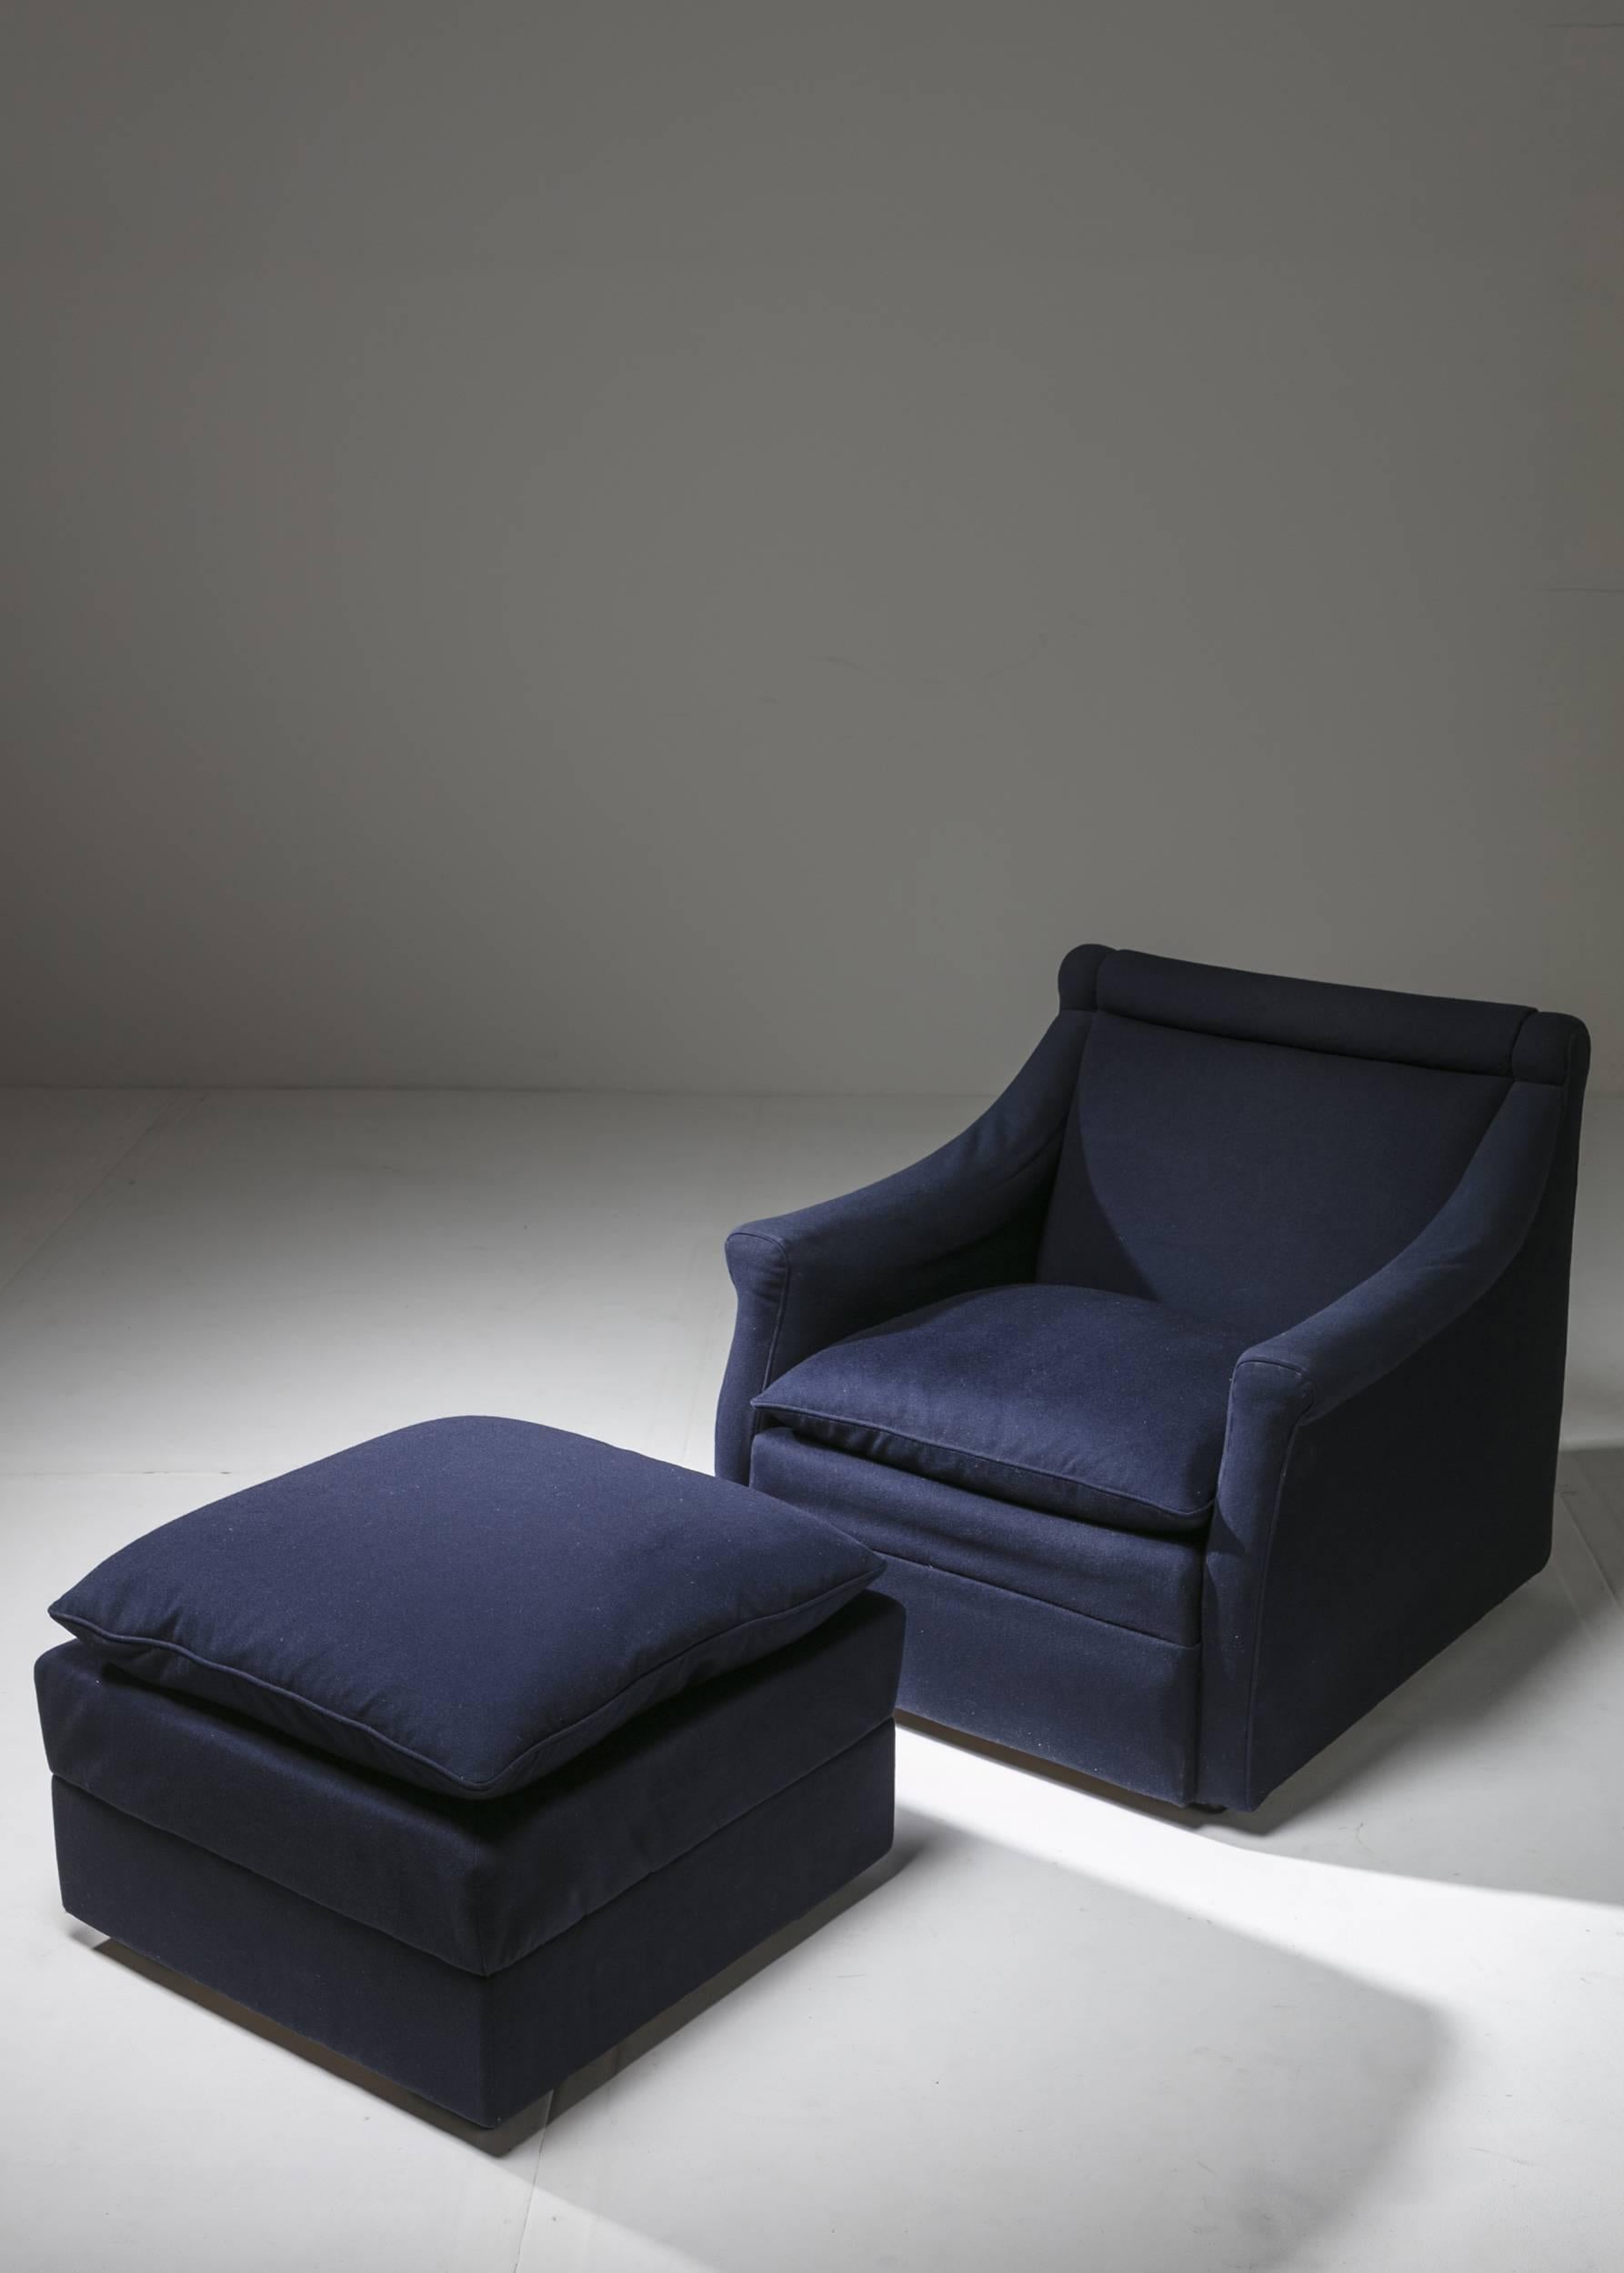 Set of two San Siro lounge chairs with ottomans model P16 by Luigi Caccia Dominioni for Azucena.
Pieces covered in wool felt featuring feather cushions with removable covers.
Ottoman size: cm 62 x 62 x H. 40.